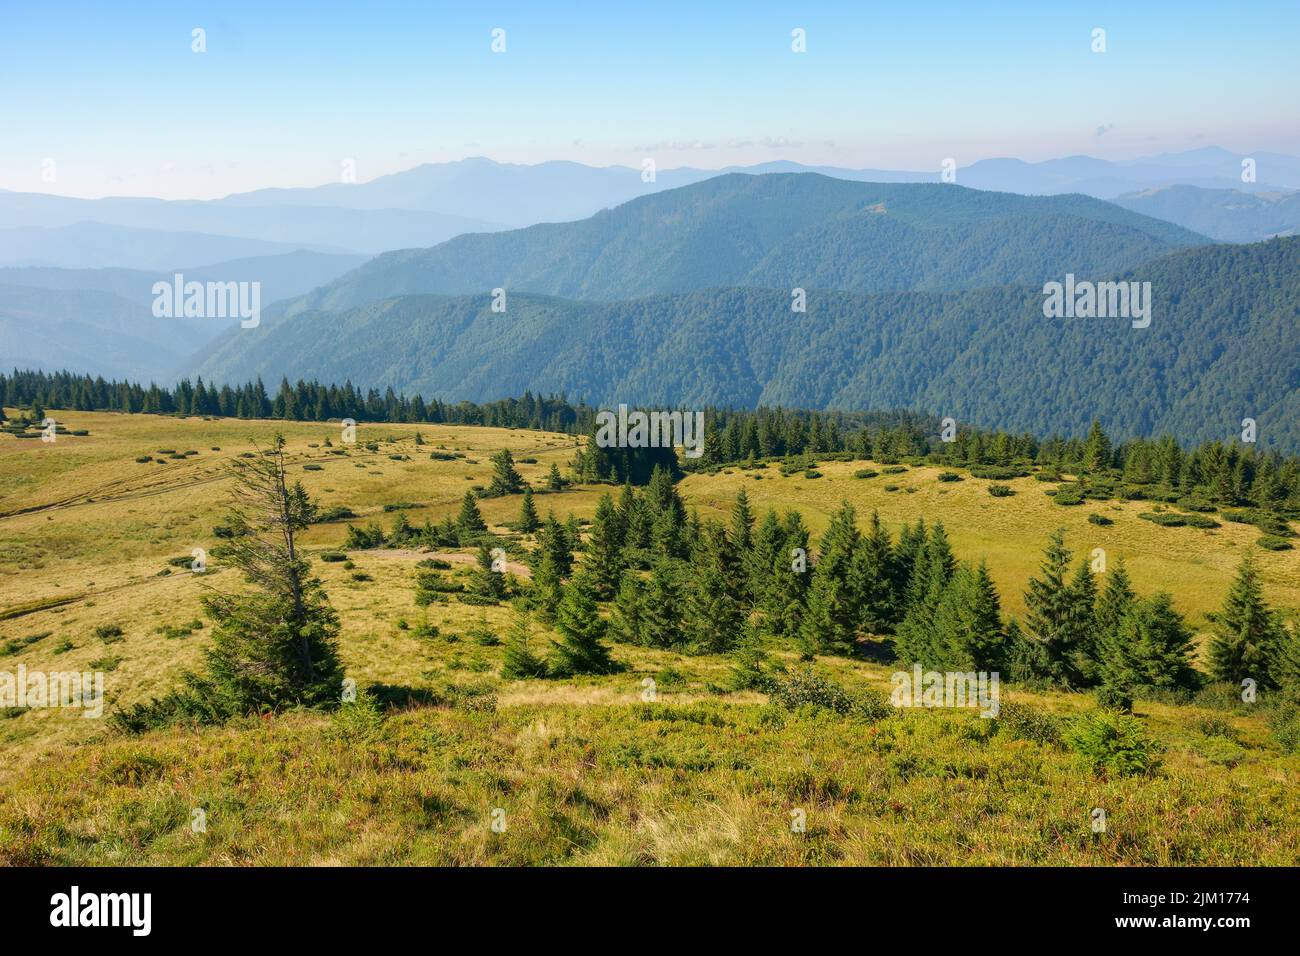 carpathian mountain landscape in summer. coniferous forest on the grassy hillside. hills and meadows in morning light. tourism and vacation season Stock Photo